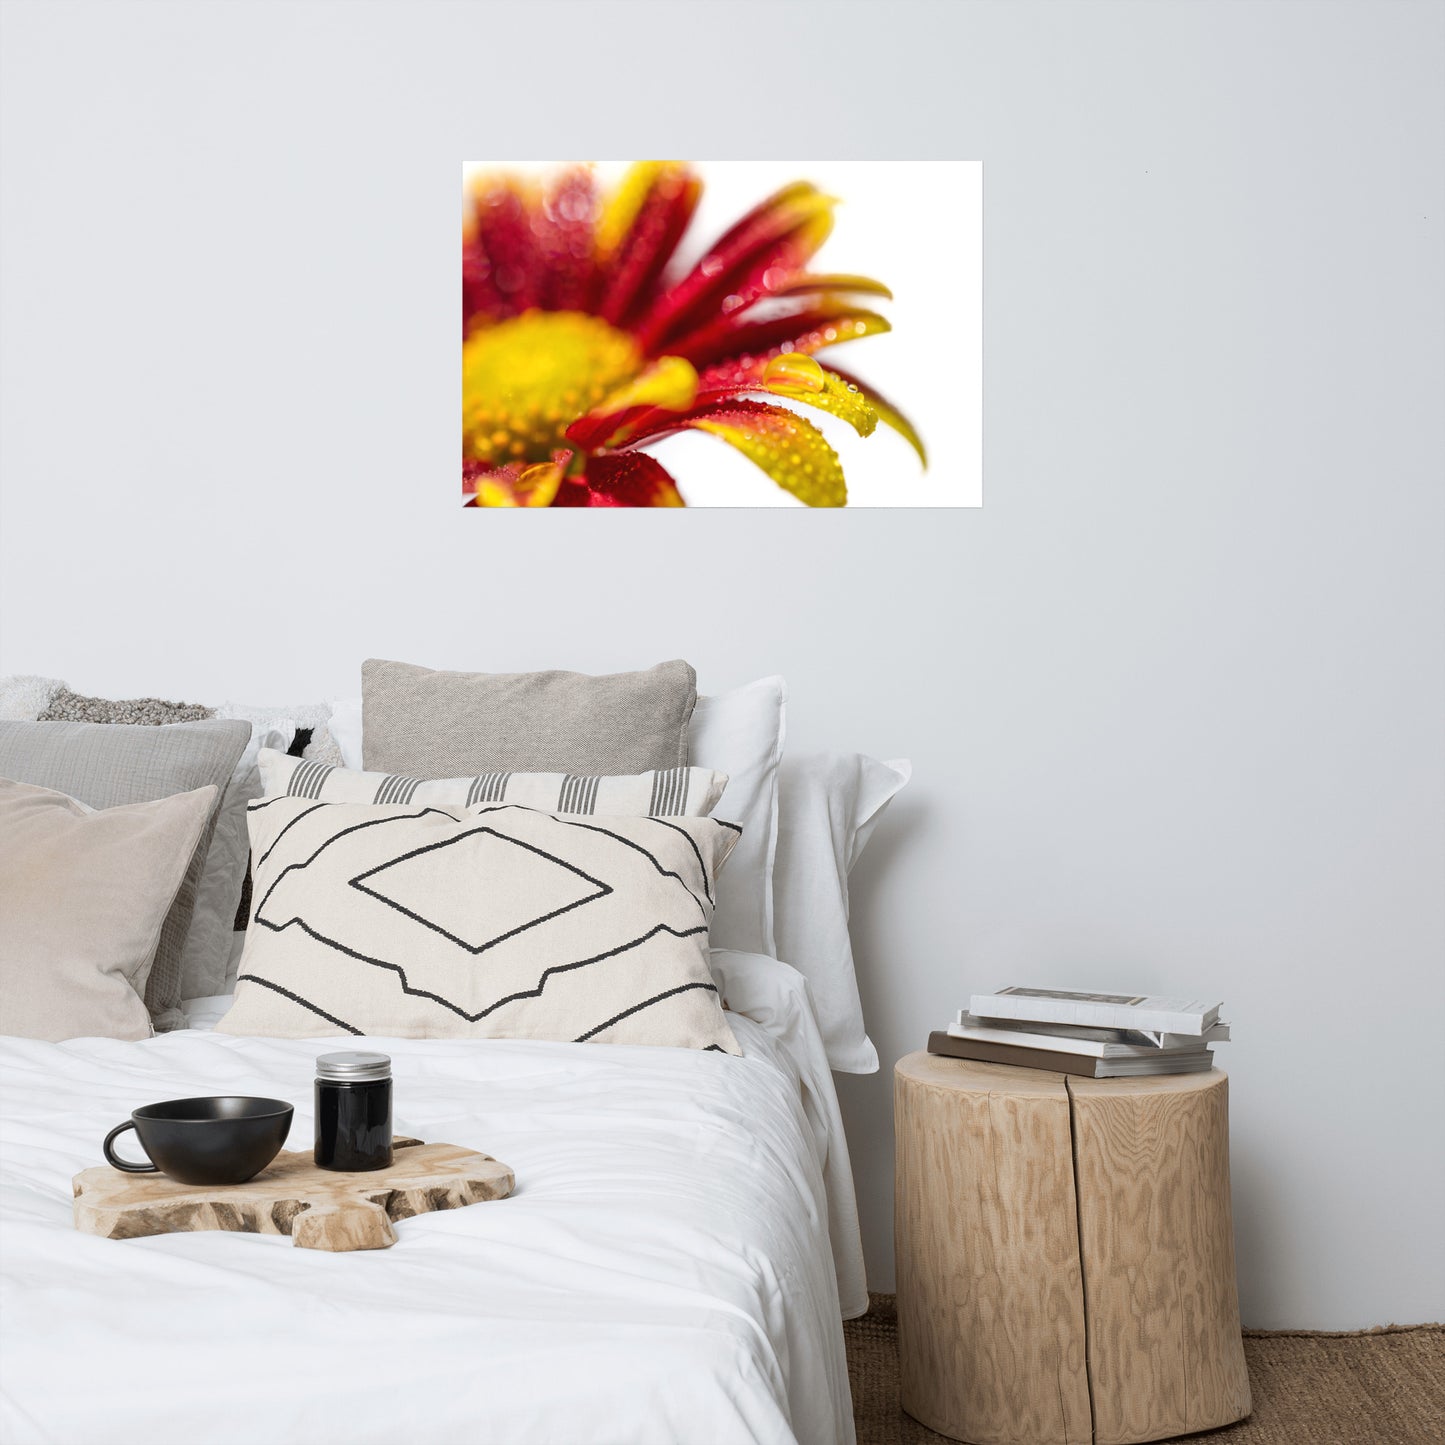 Water Droplets On Mum Petals Floral Nature Photo Loose Unframed Wall Art Prints